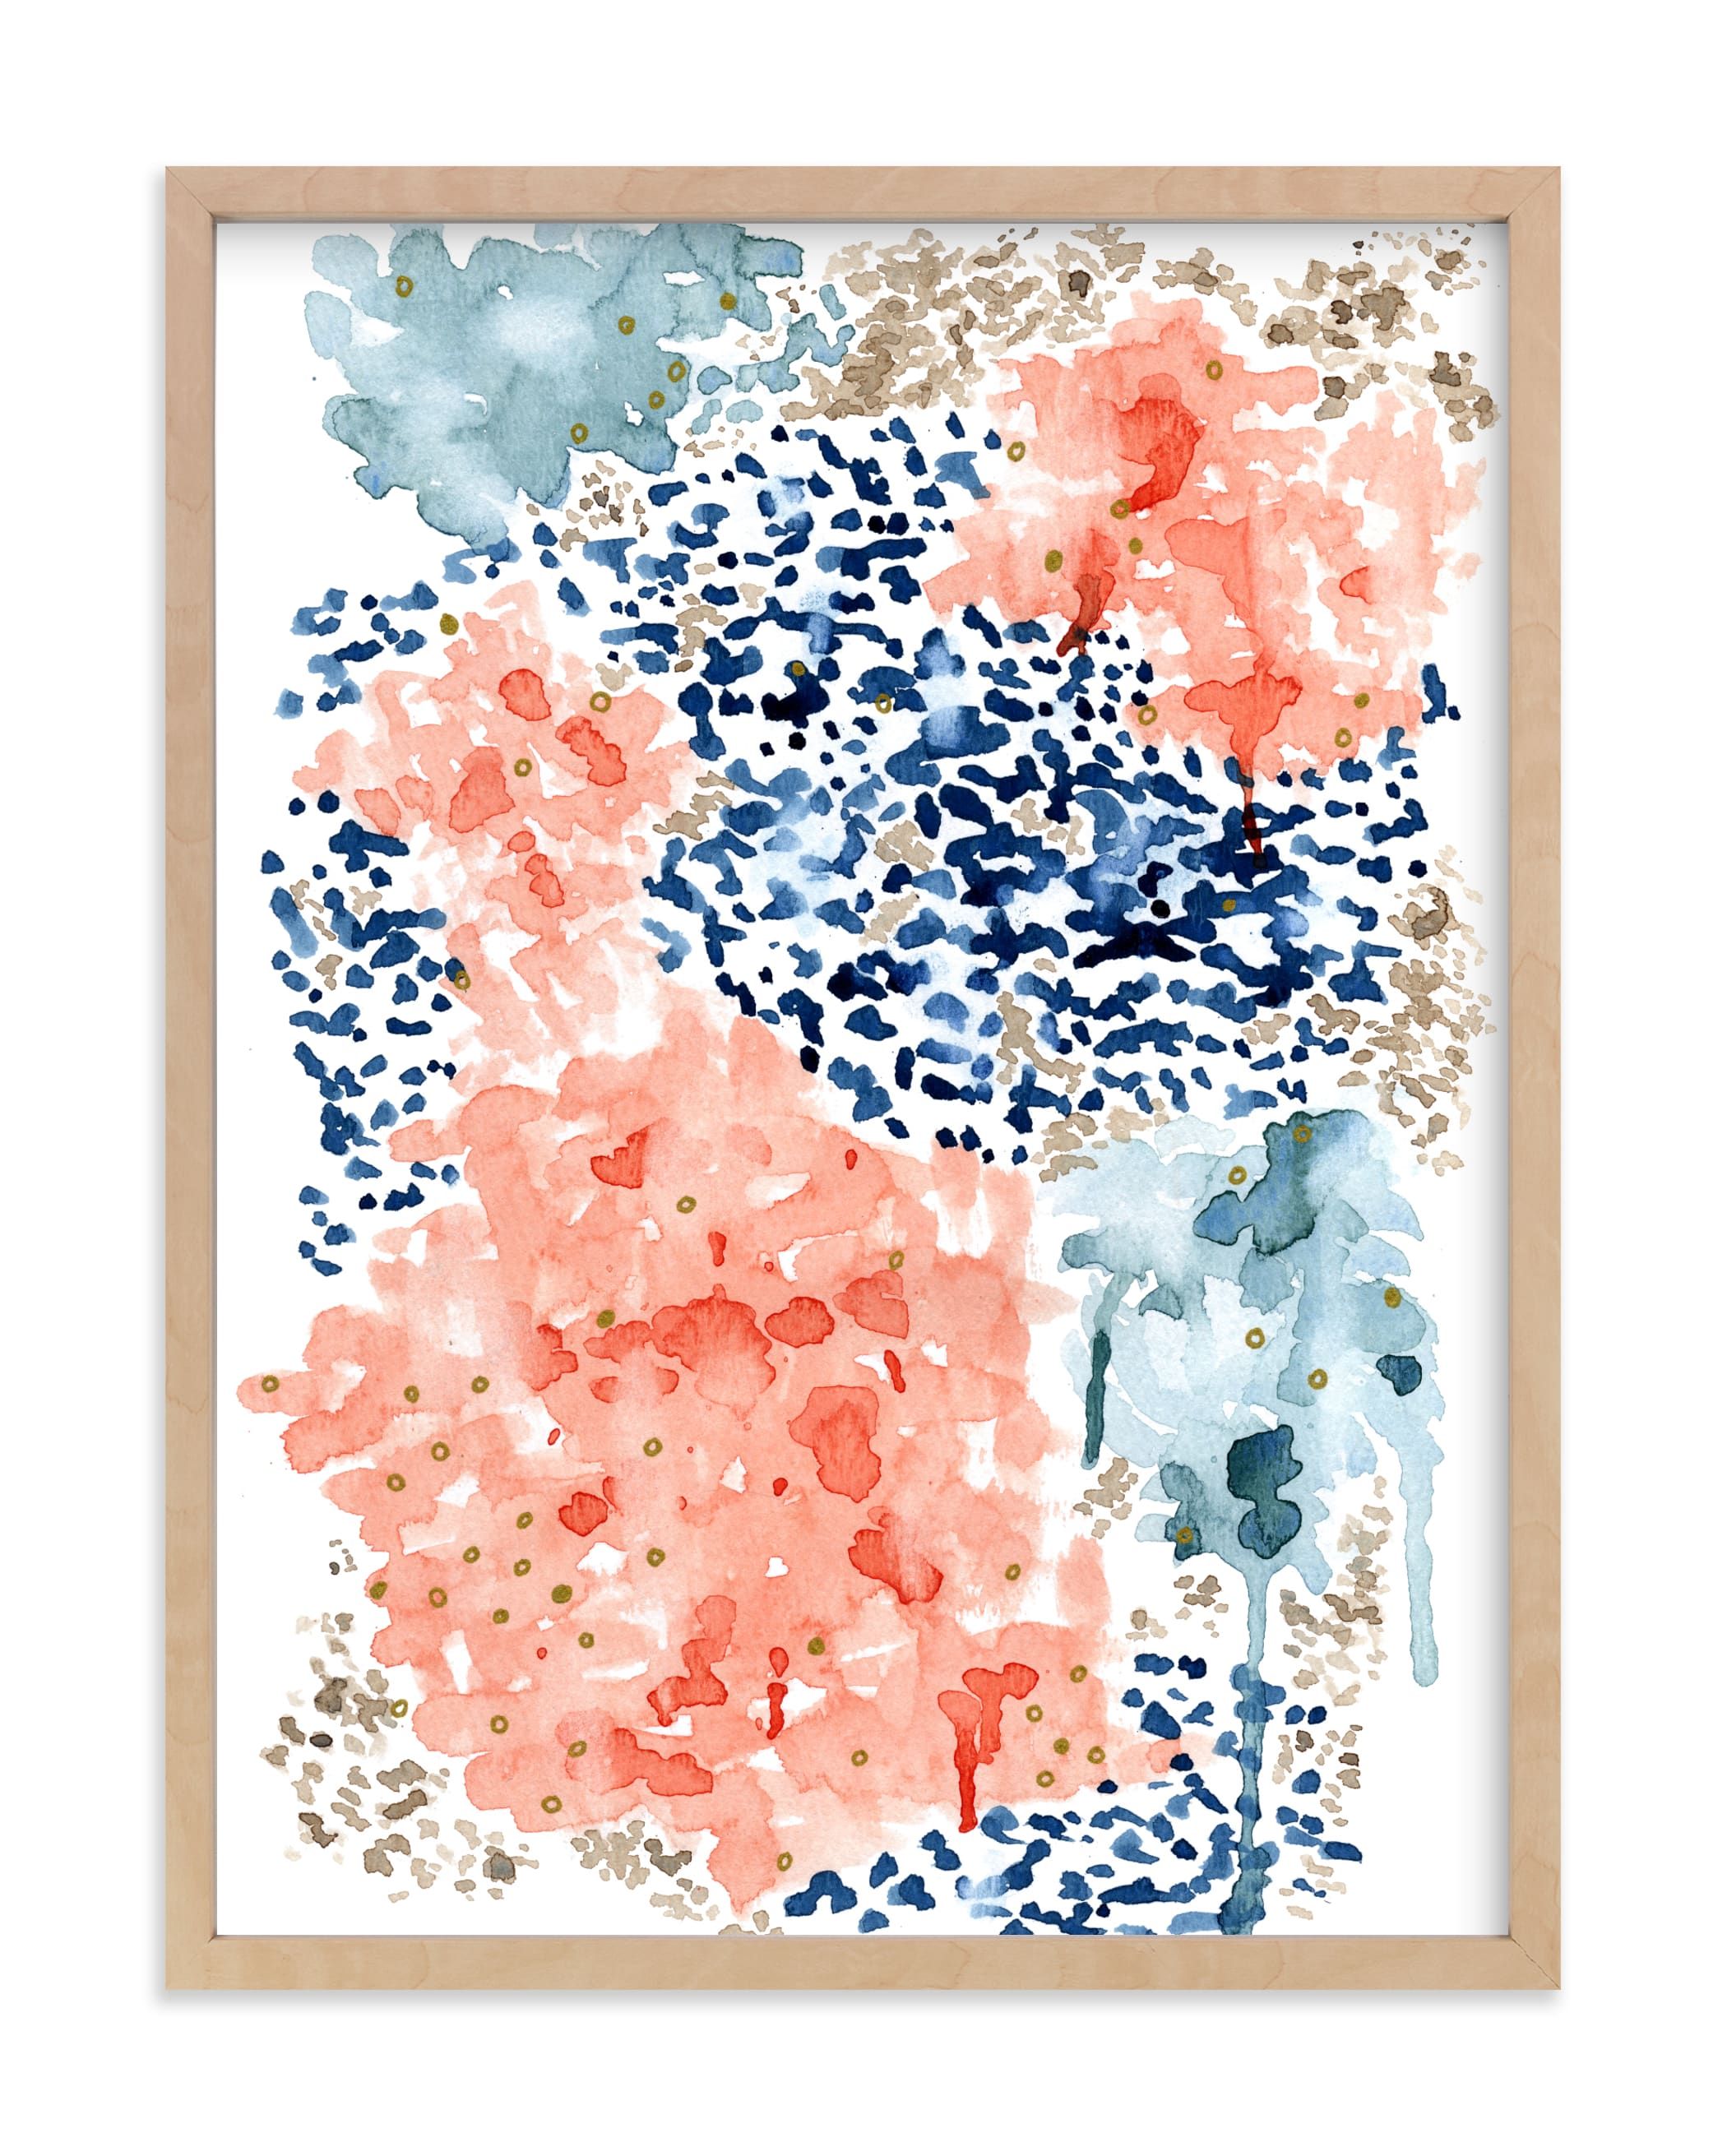 "Flutter Watercolor" - Painting Limited Edition Art Print by Andi Pahl. | Minted